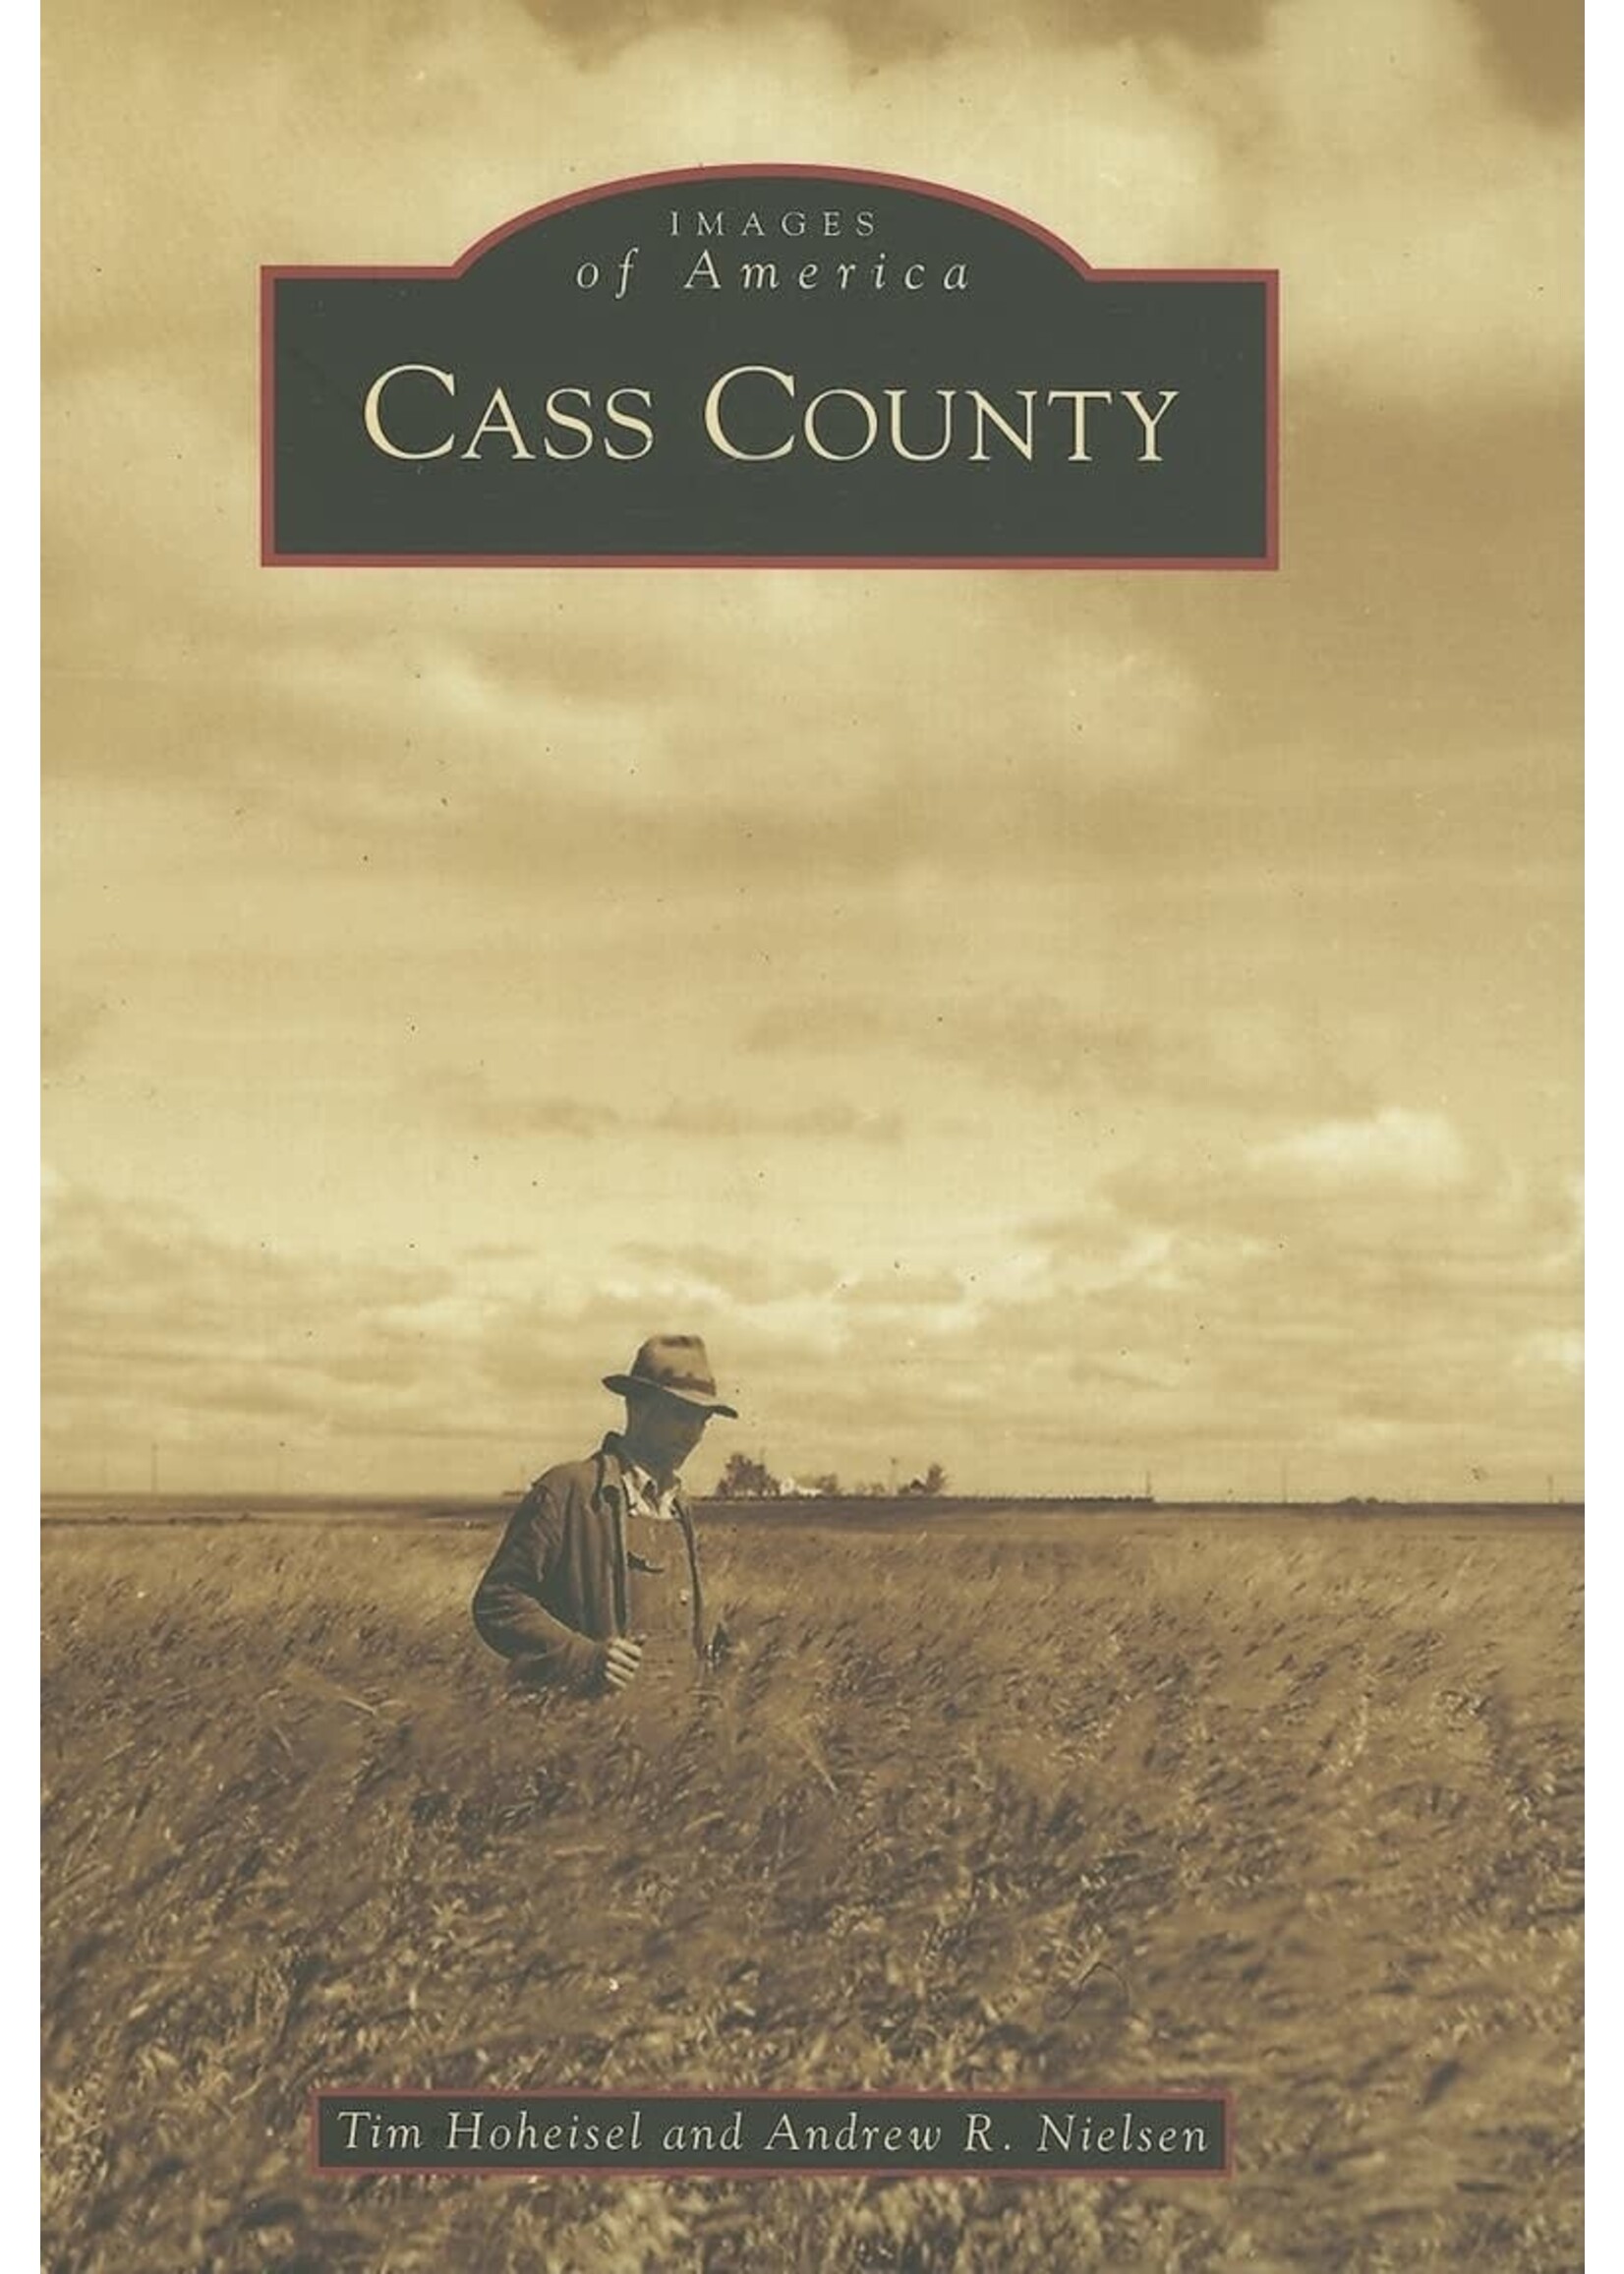 Cass County: Images of America